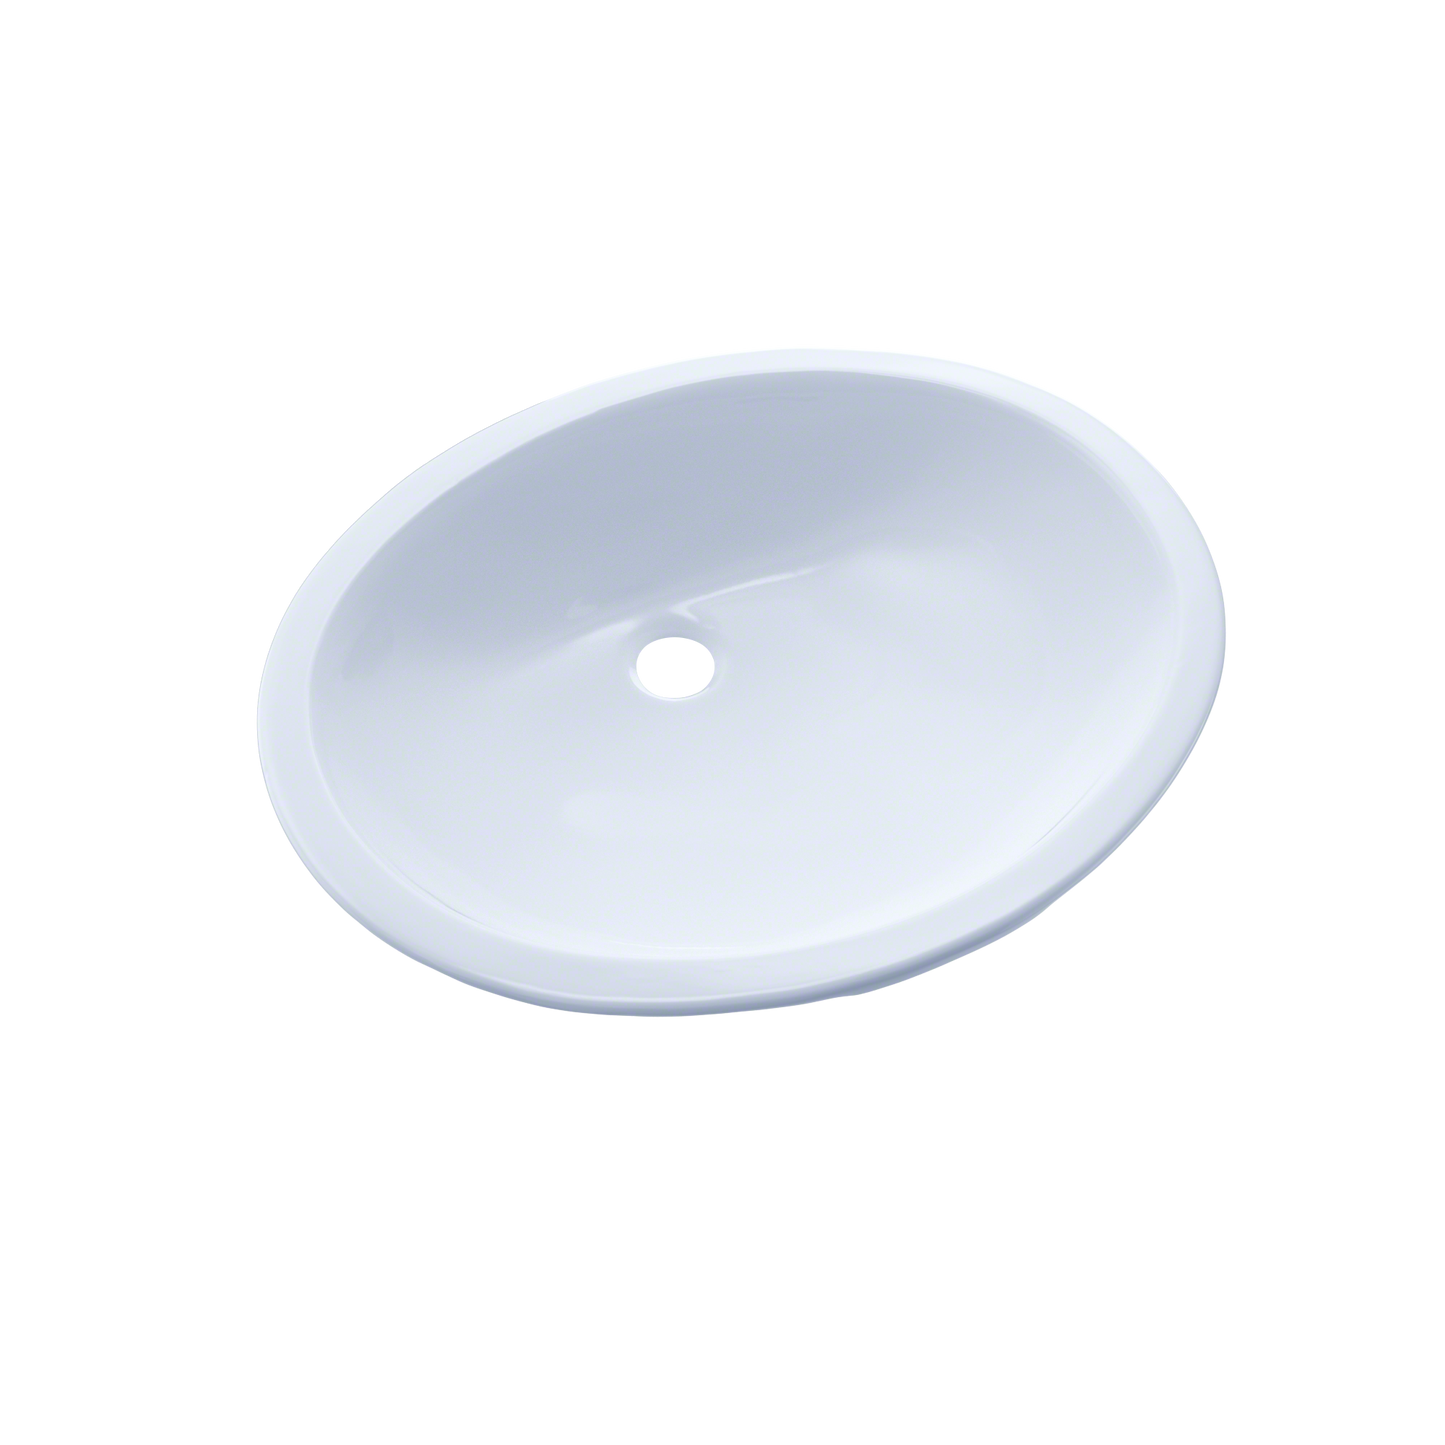 Toto LT579G#01 - Rendezvous 17" Undermount Bathroom Sink with Overflow and CeFiONtect Ceramic Glaze-